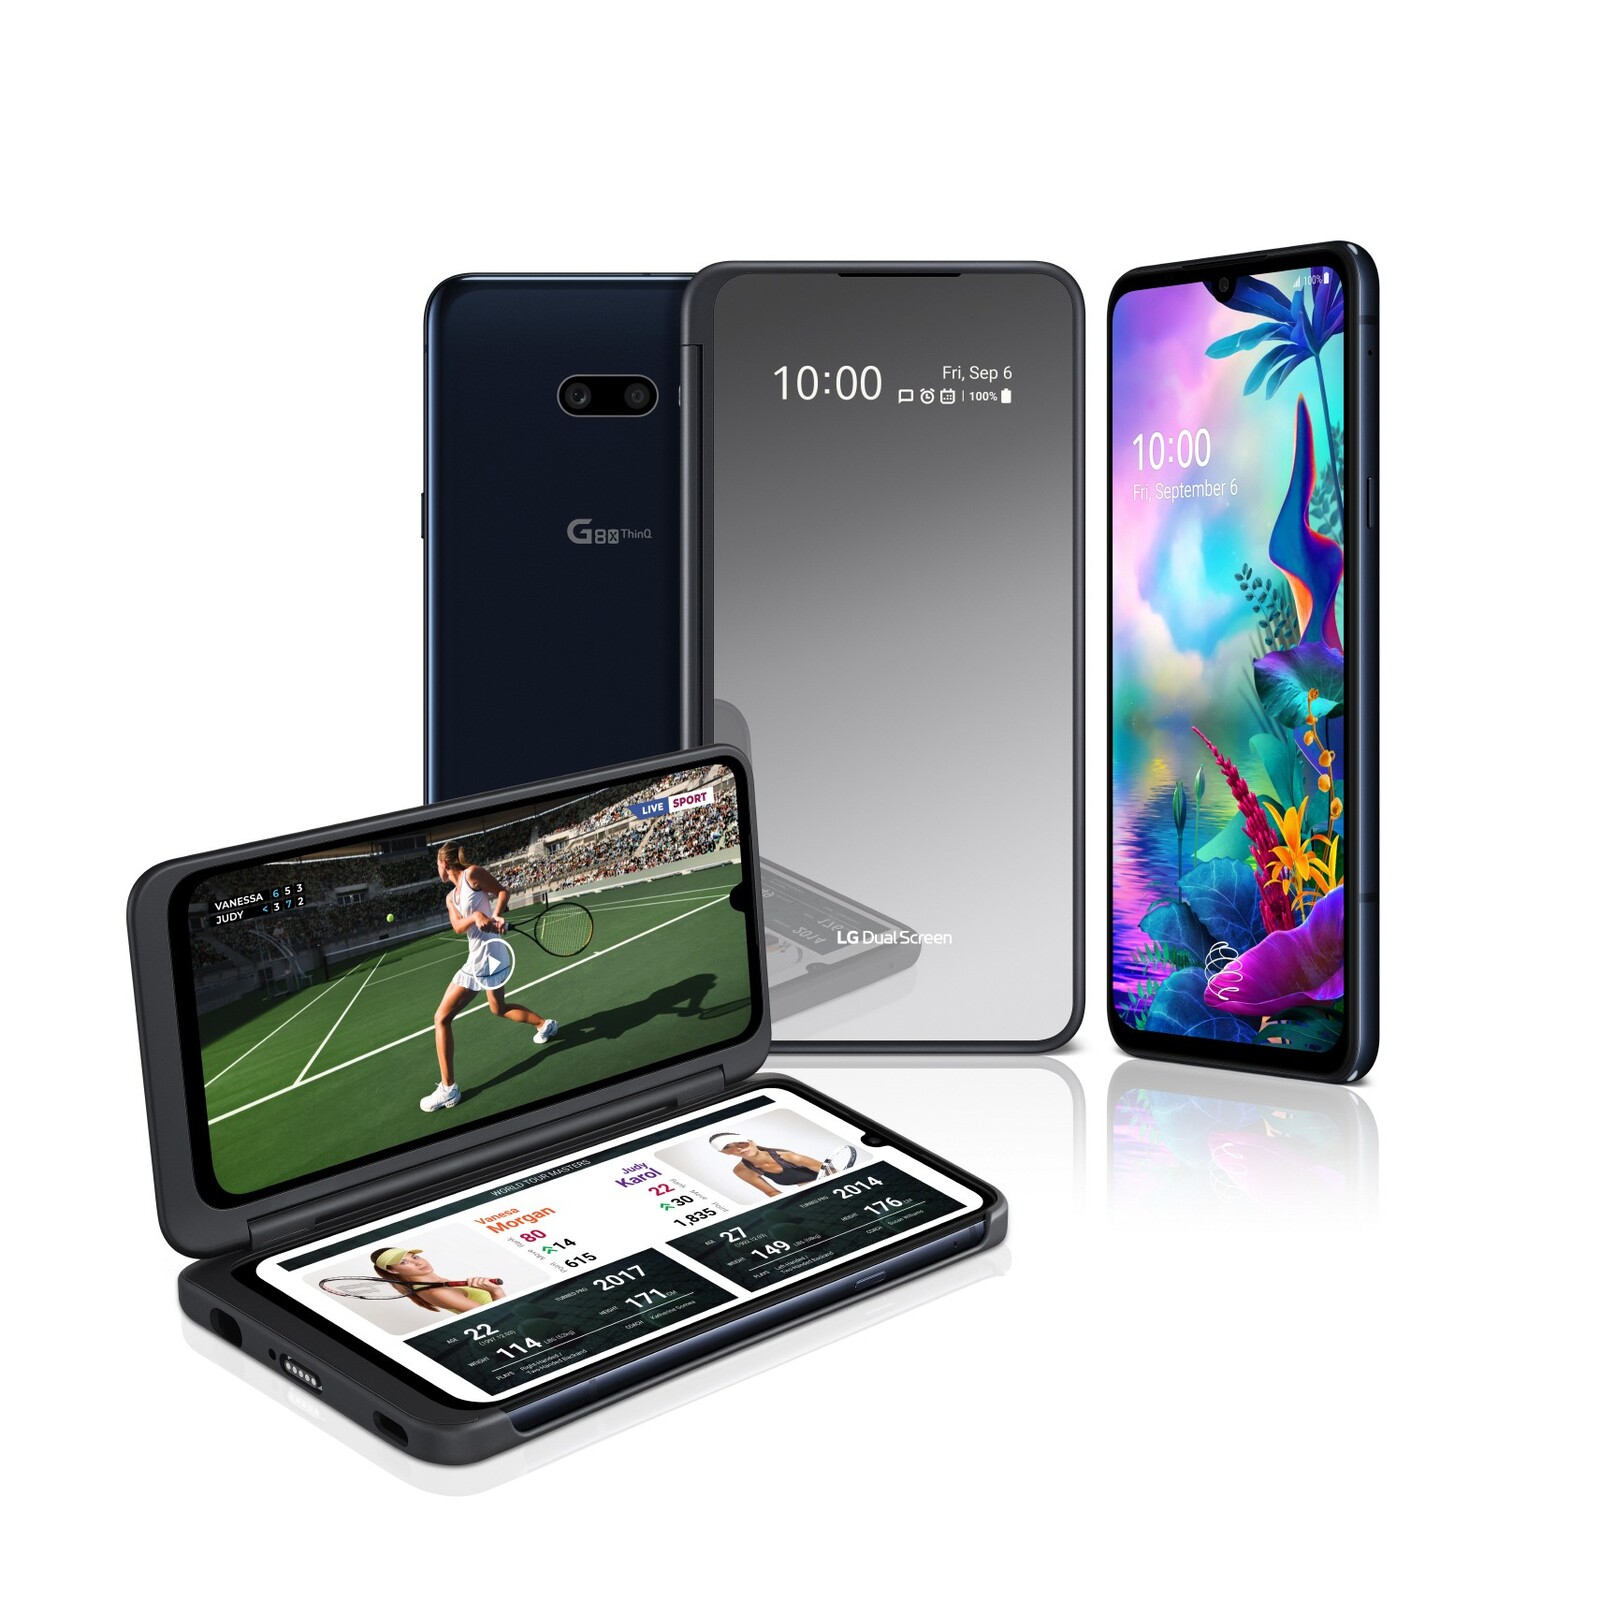 LG G8X ThinQ launched, new second screen accessory also includes third